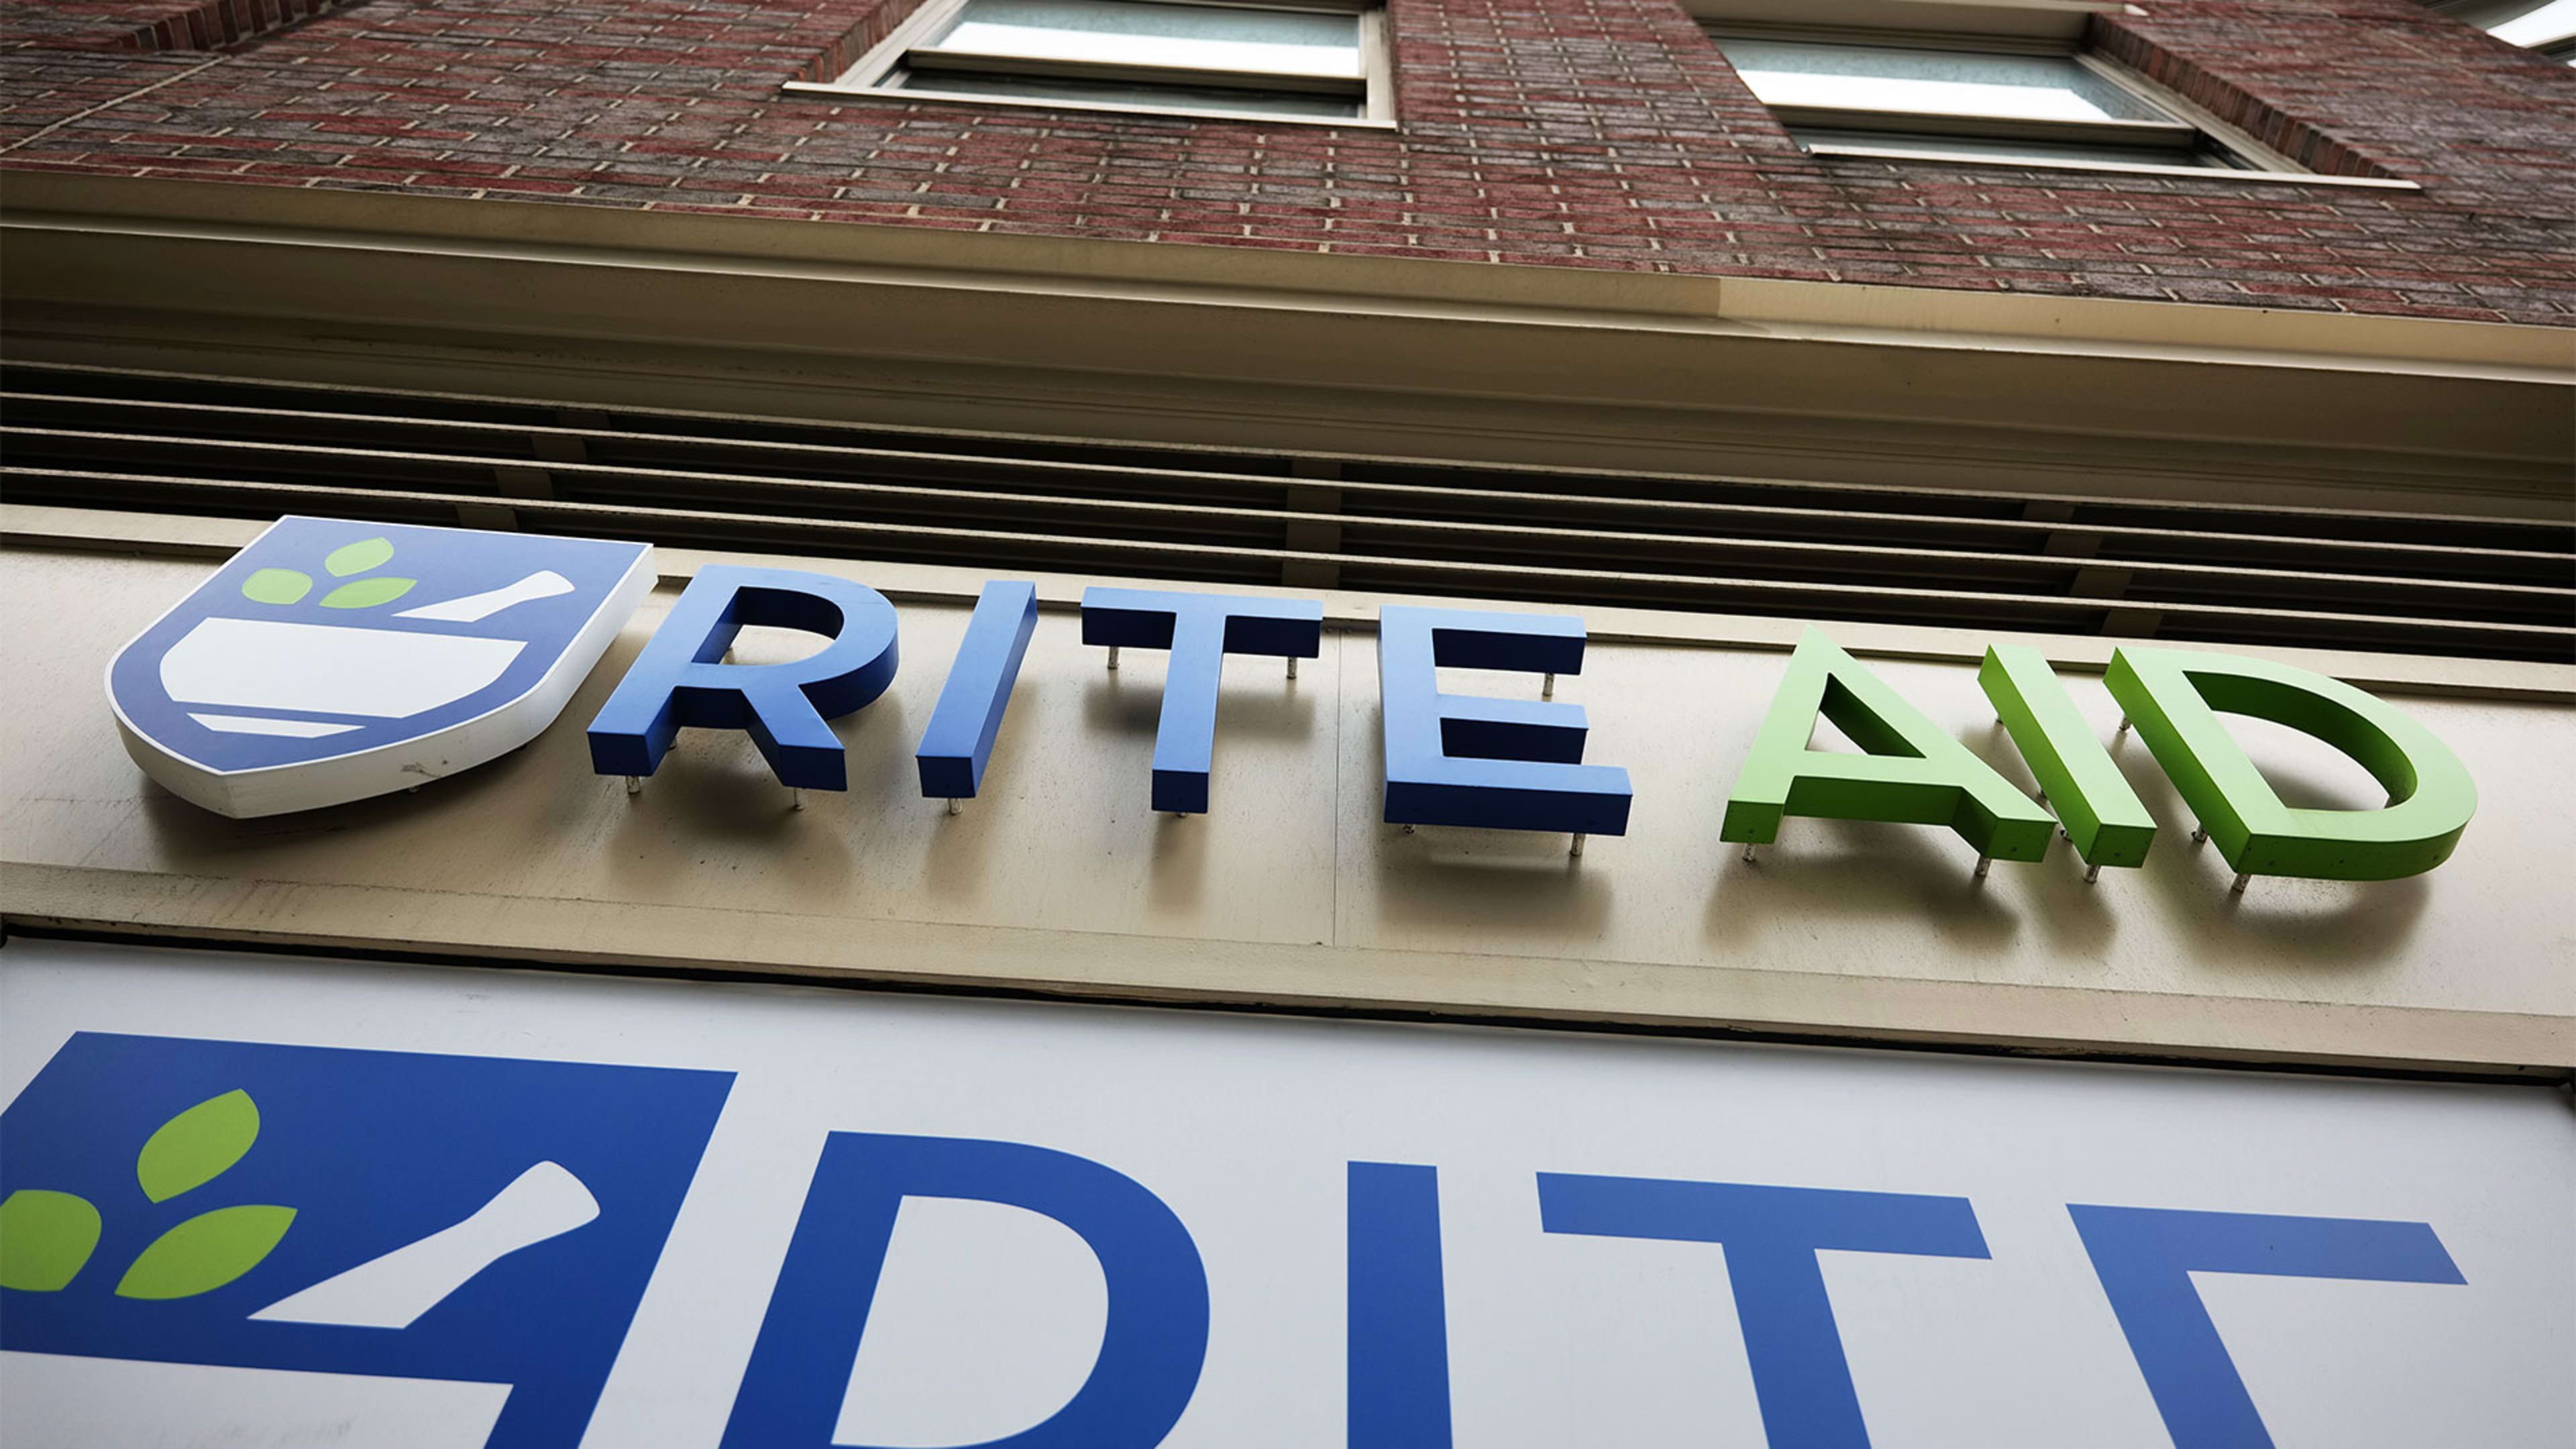 Rite Aid bankruptcy is yet another sign that the big chain pharmacy model is broken